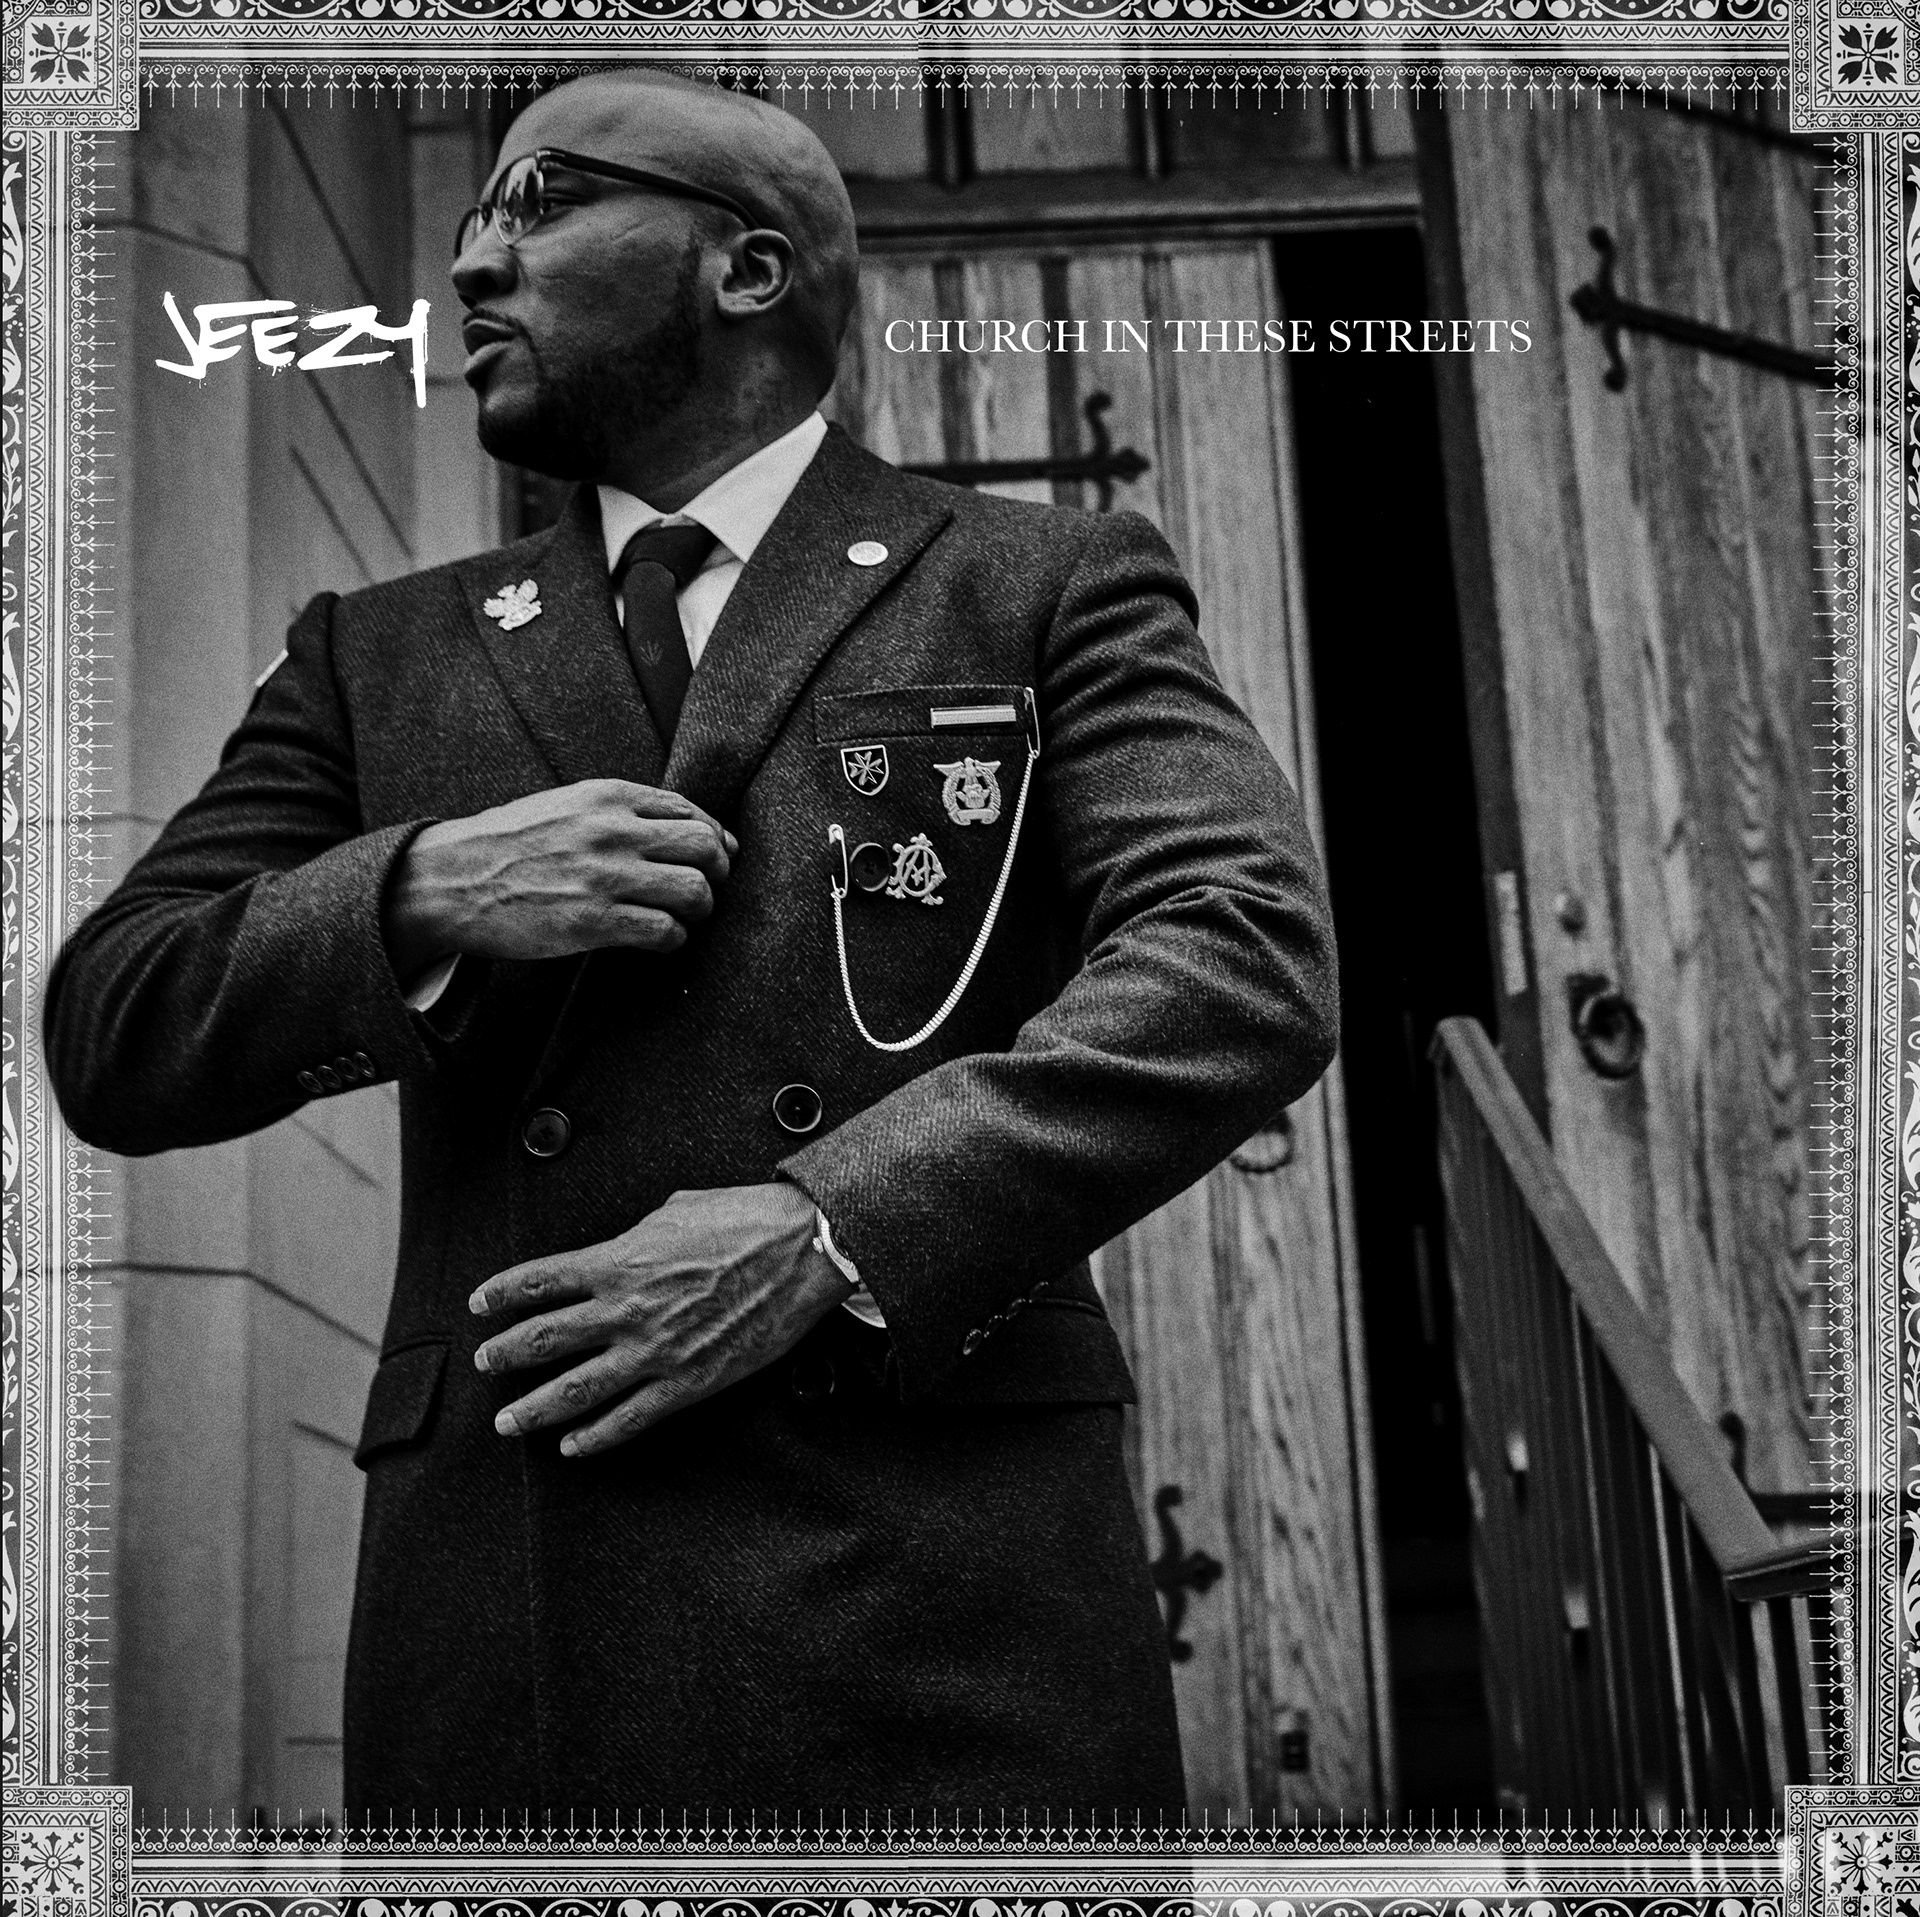 Young jeezy church in these streets torrents links para o torrents